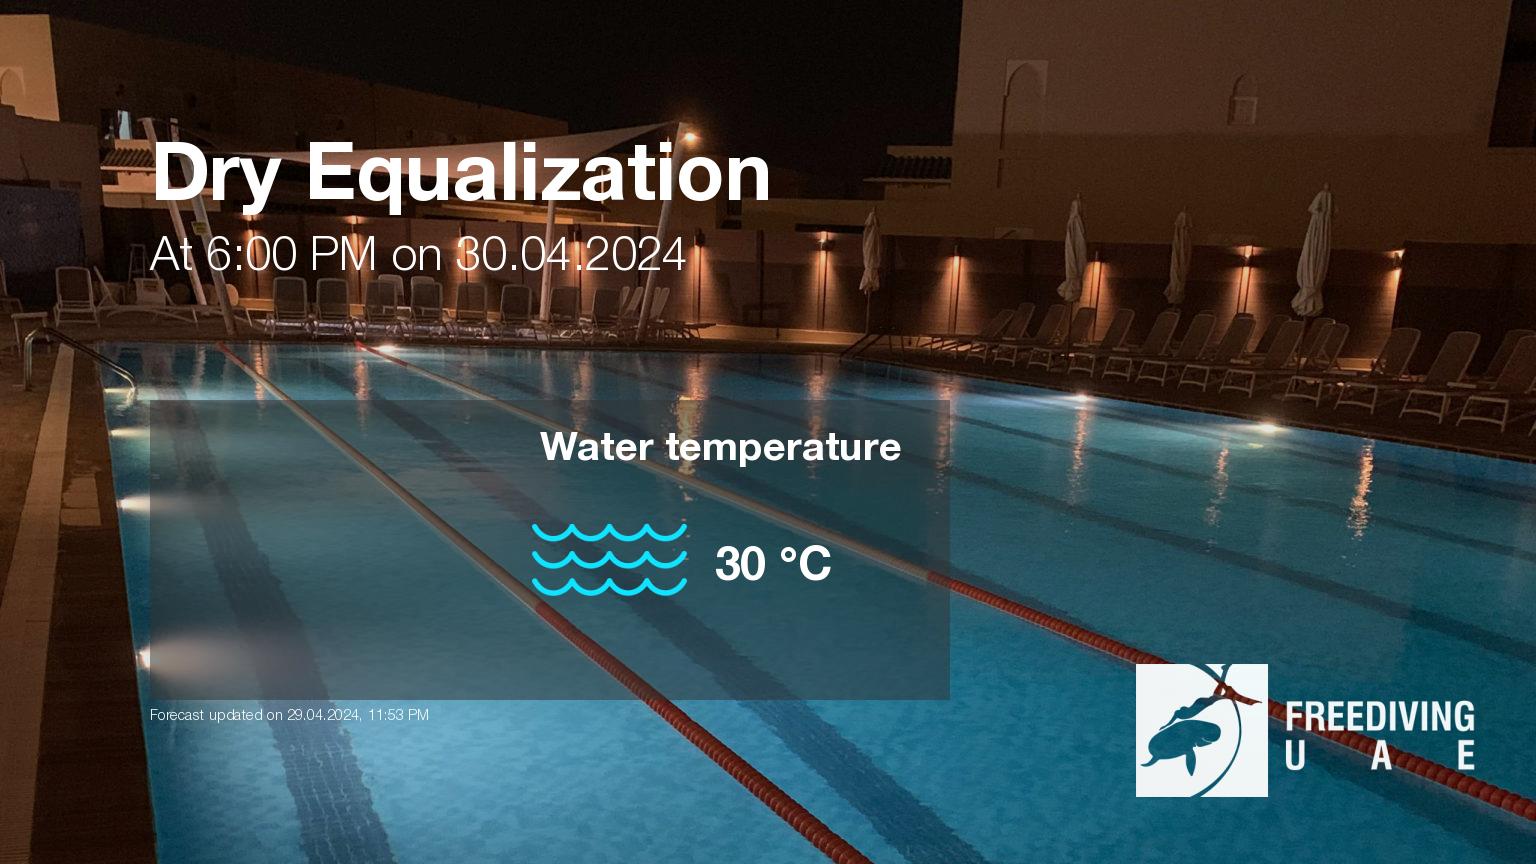 Expected weather during Dry Equalization on Tue, Apr 30, at 6:00 PM